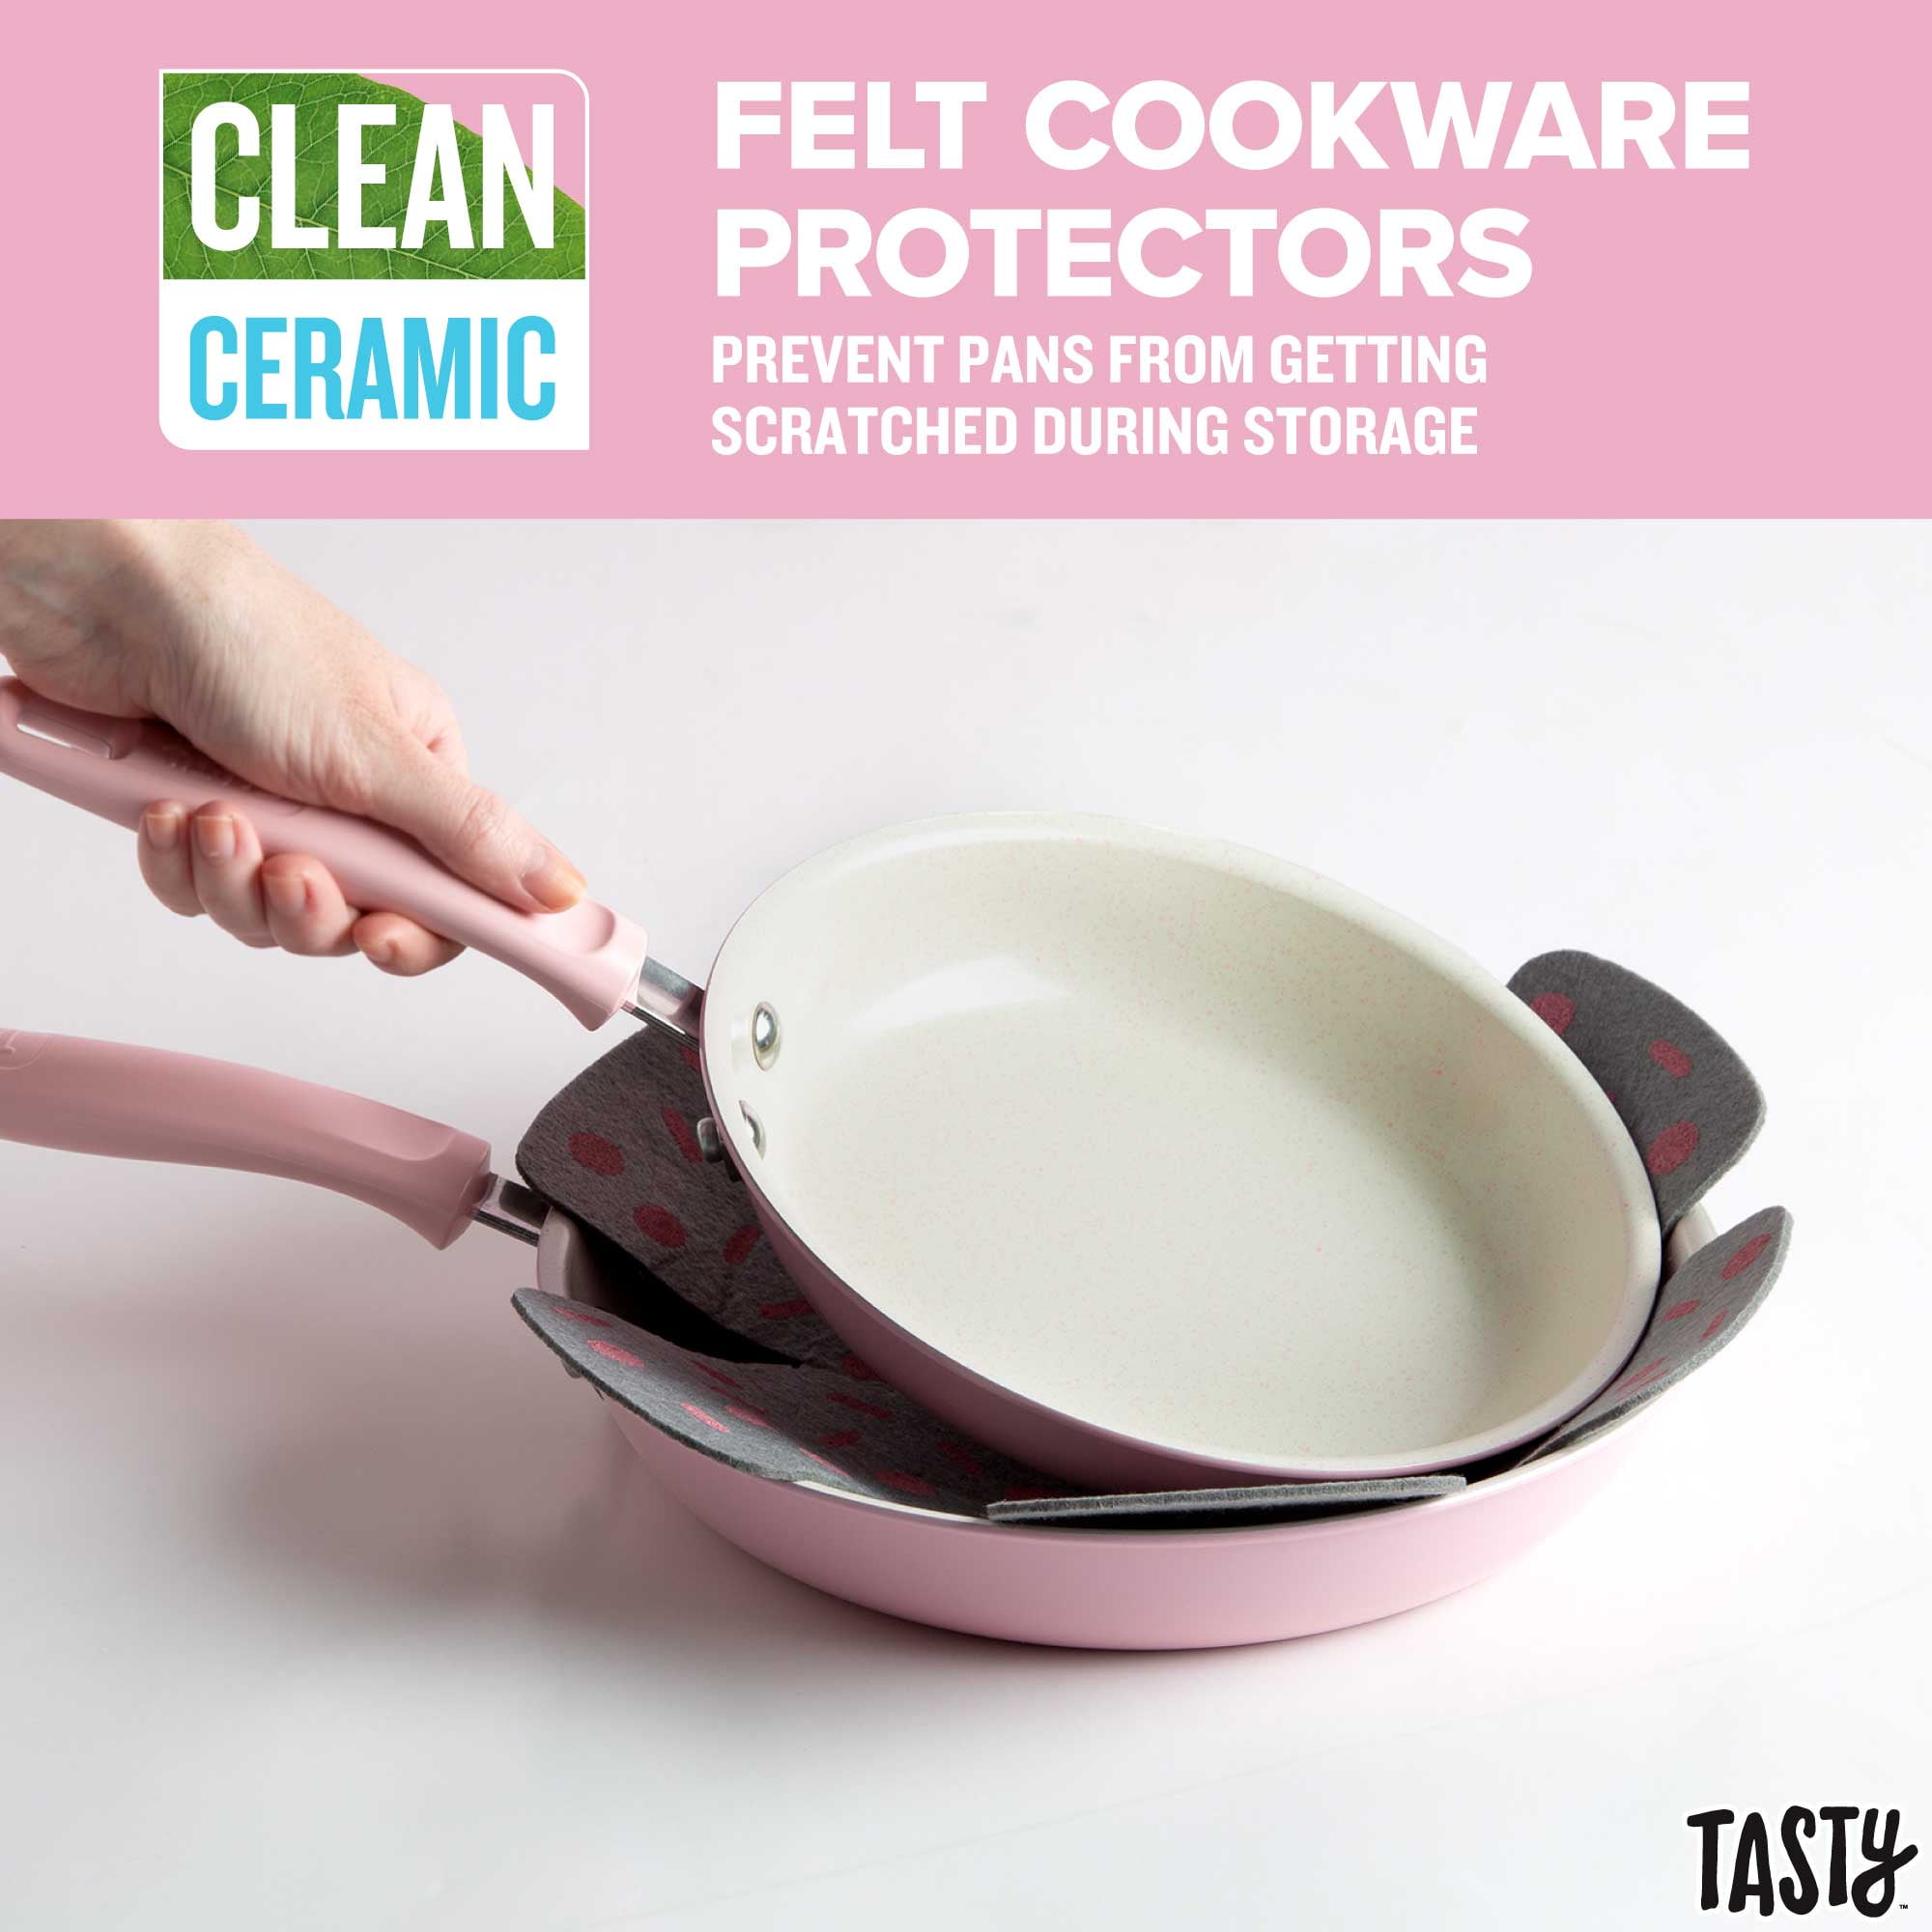 Tasty's Cookware Collection Is 30% Off, And My Kitchen Is Ready